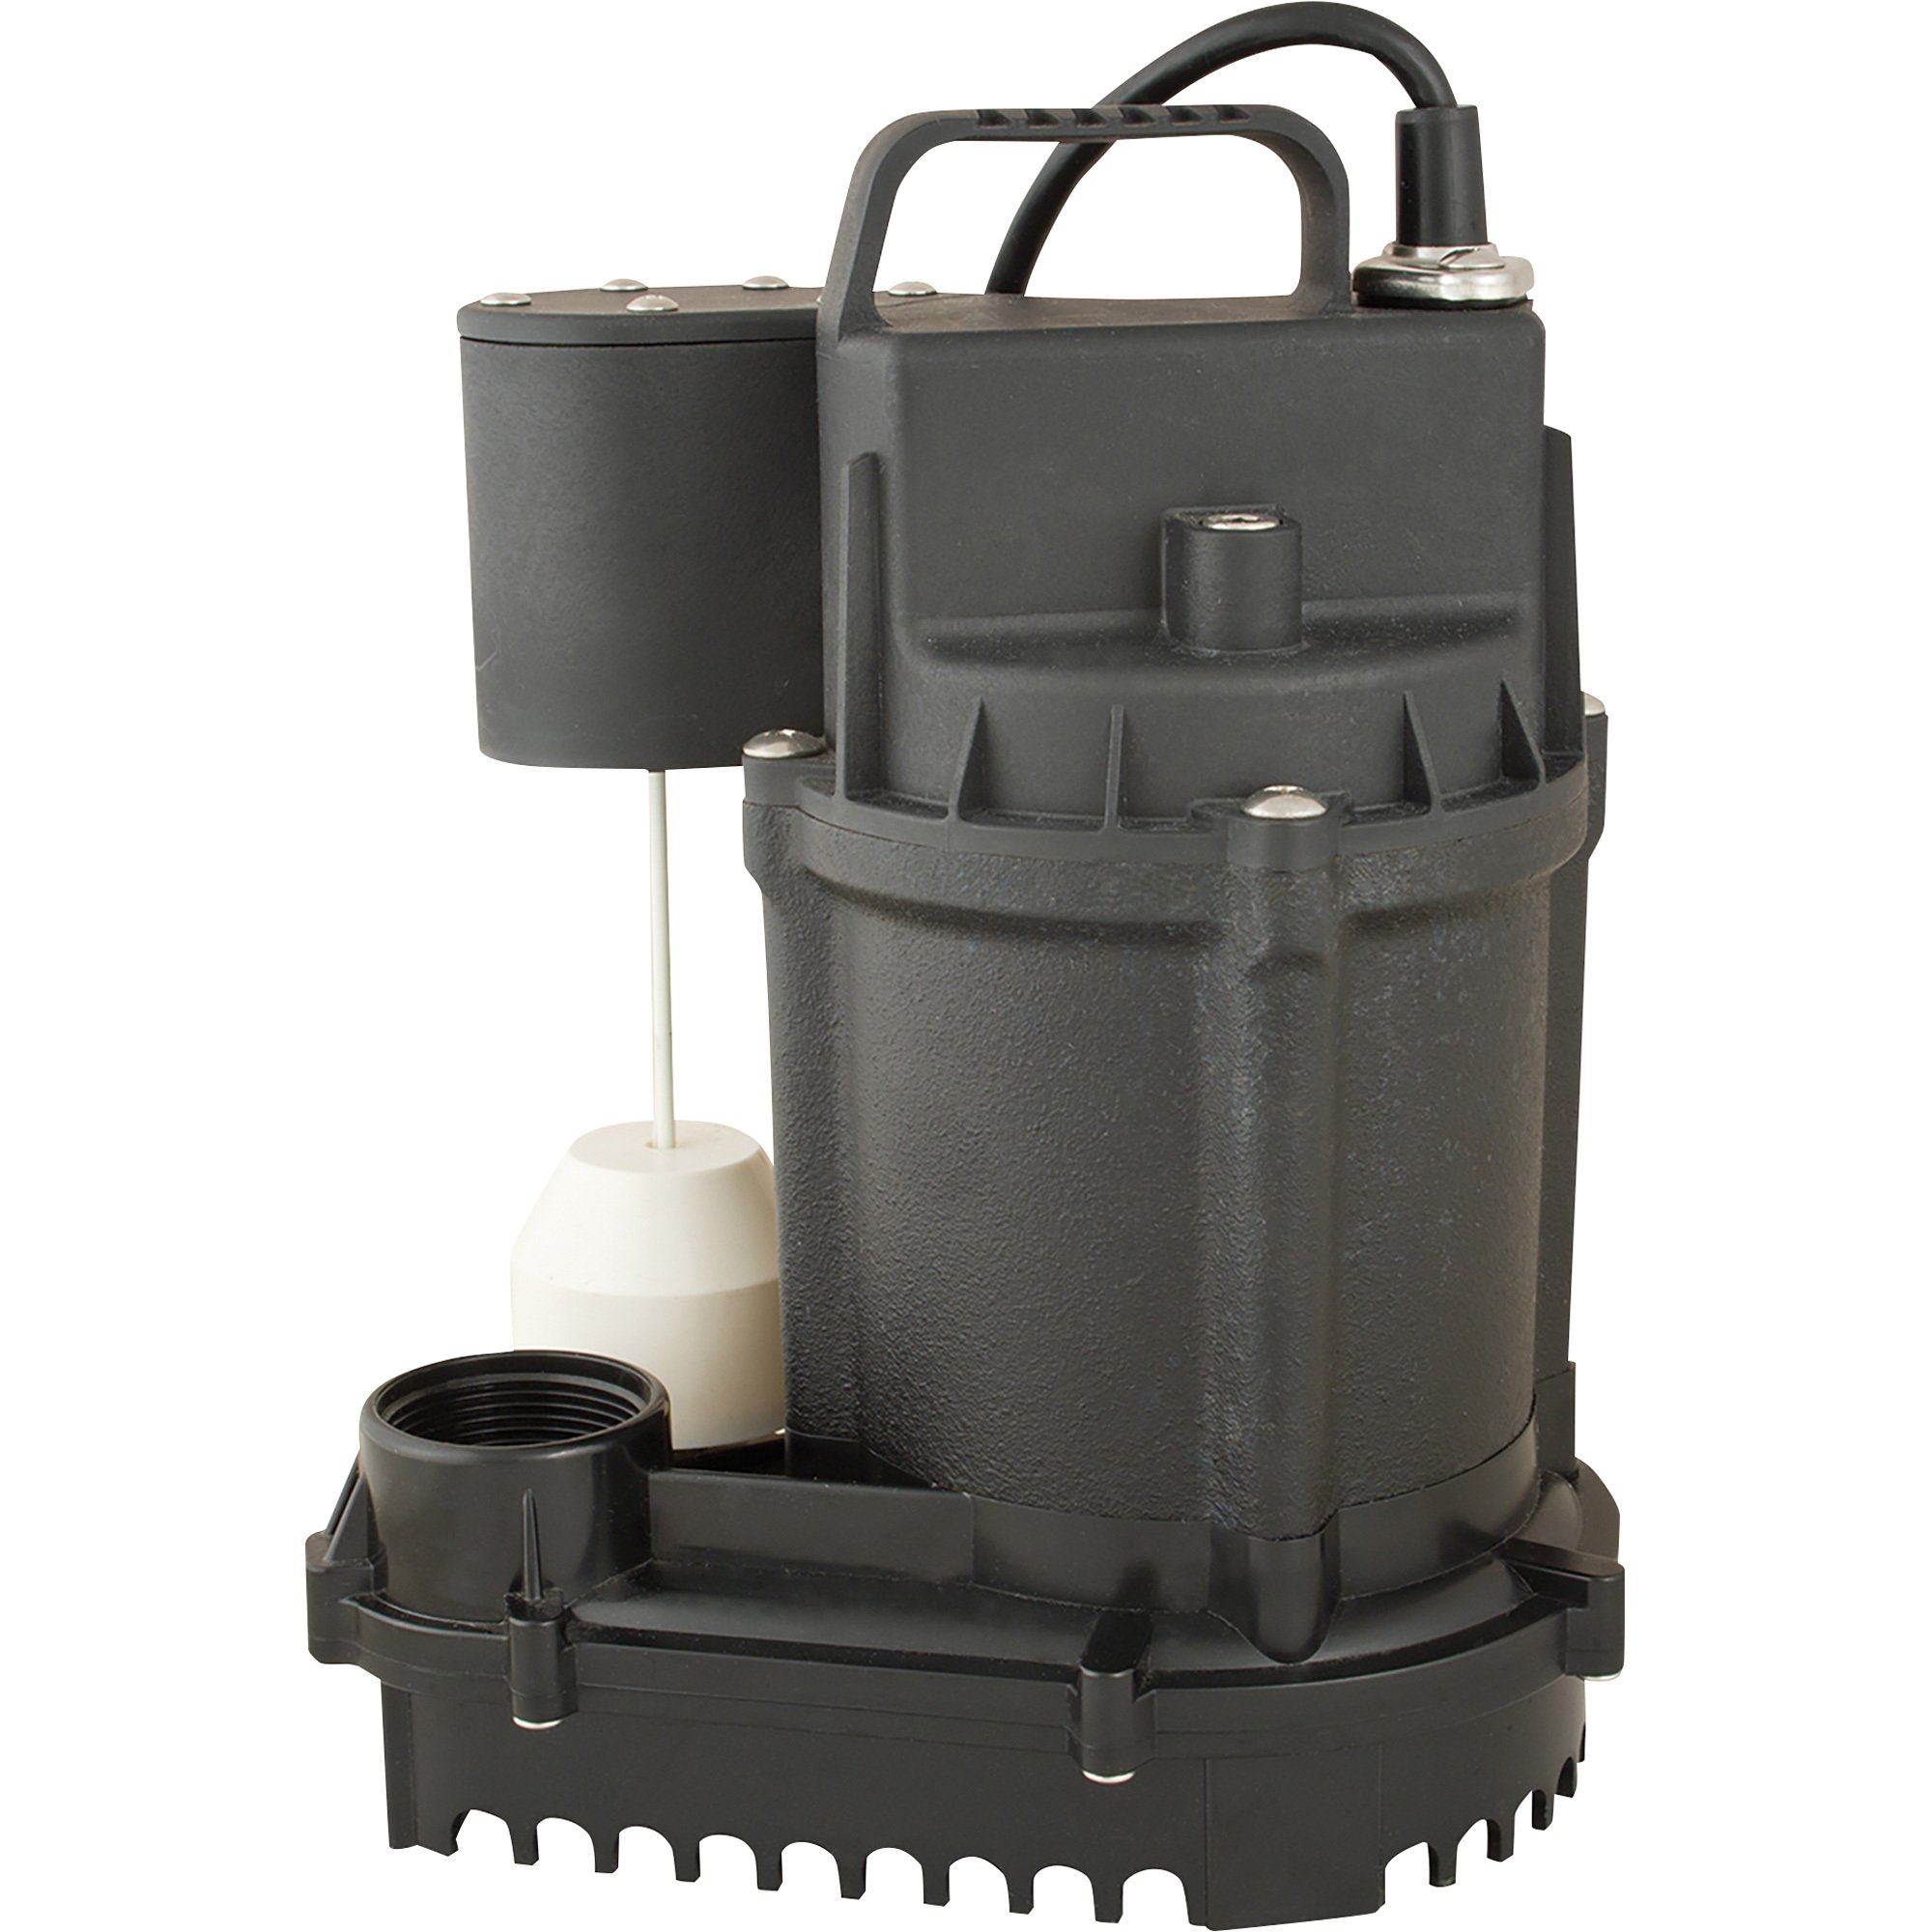 1/3 HP Submersible Sump Pump with Vertical Float 3400 GPH